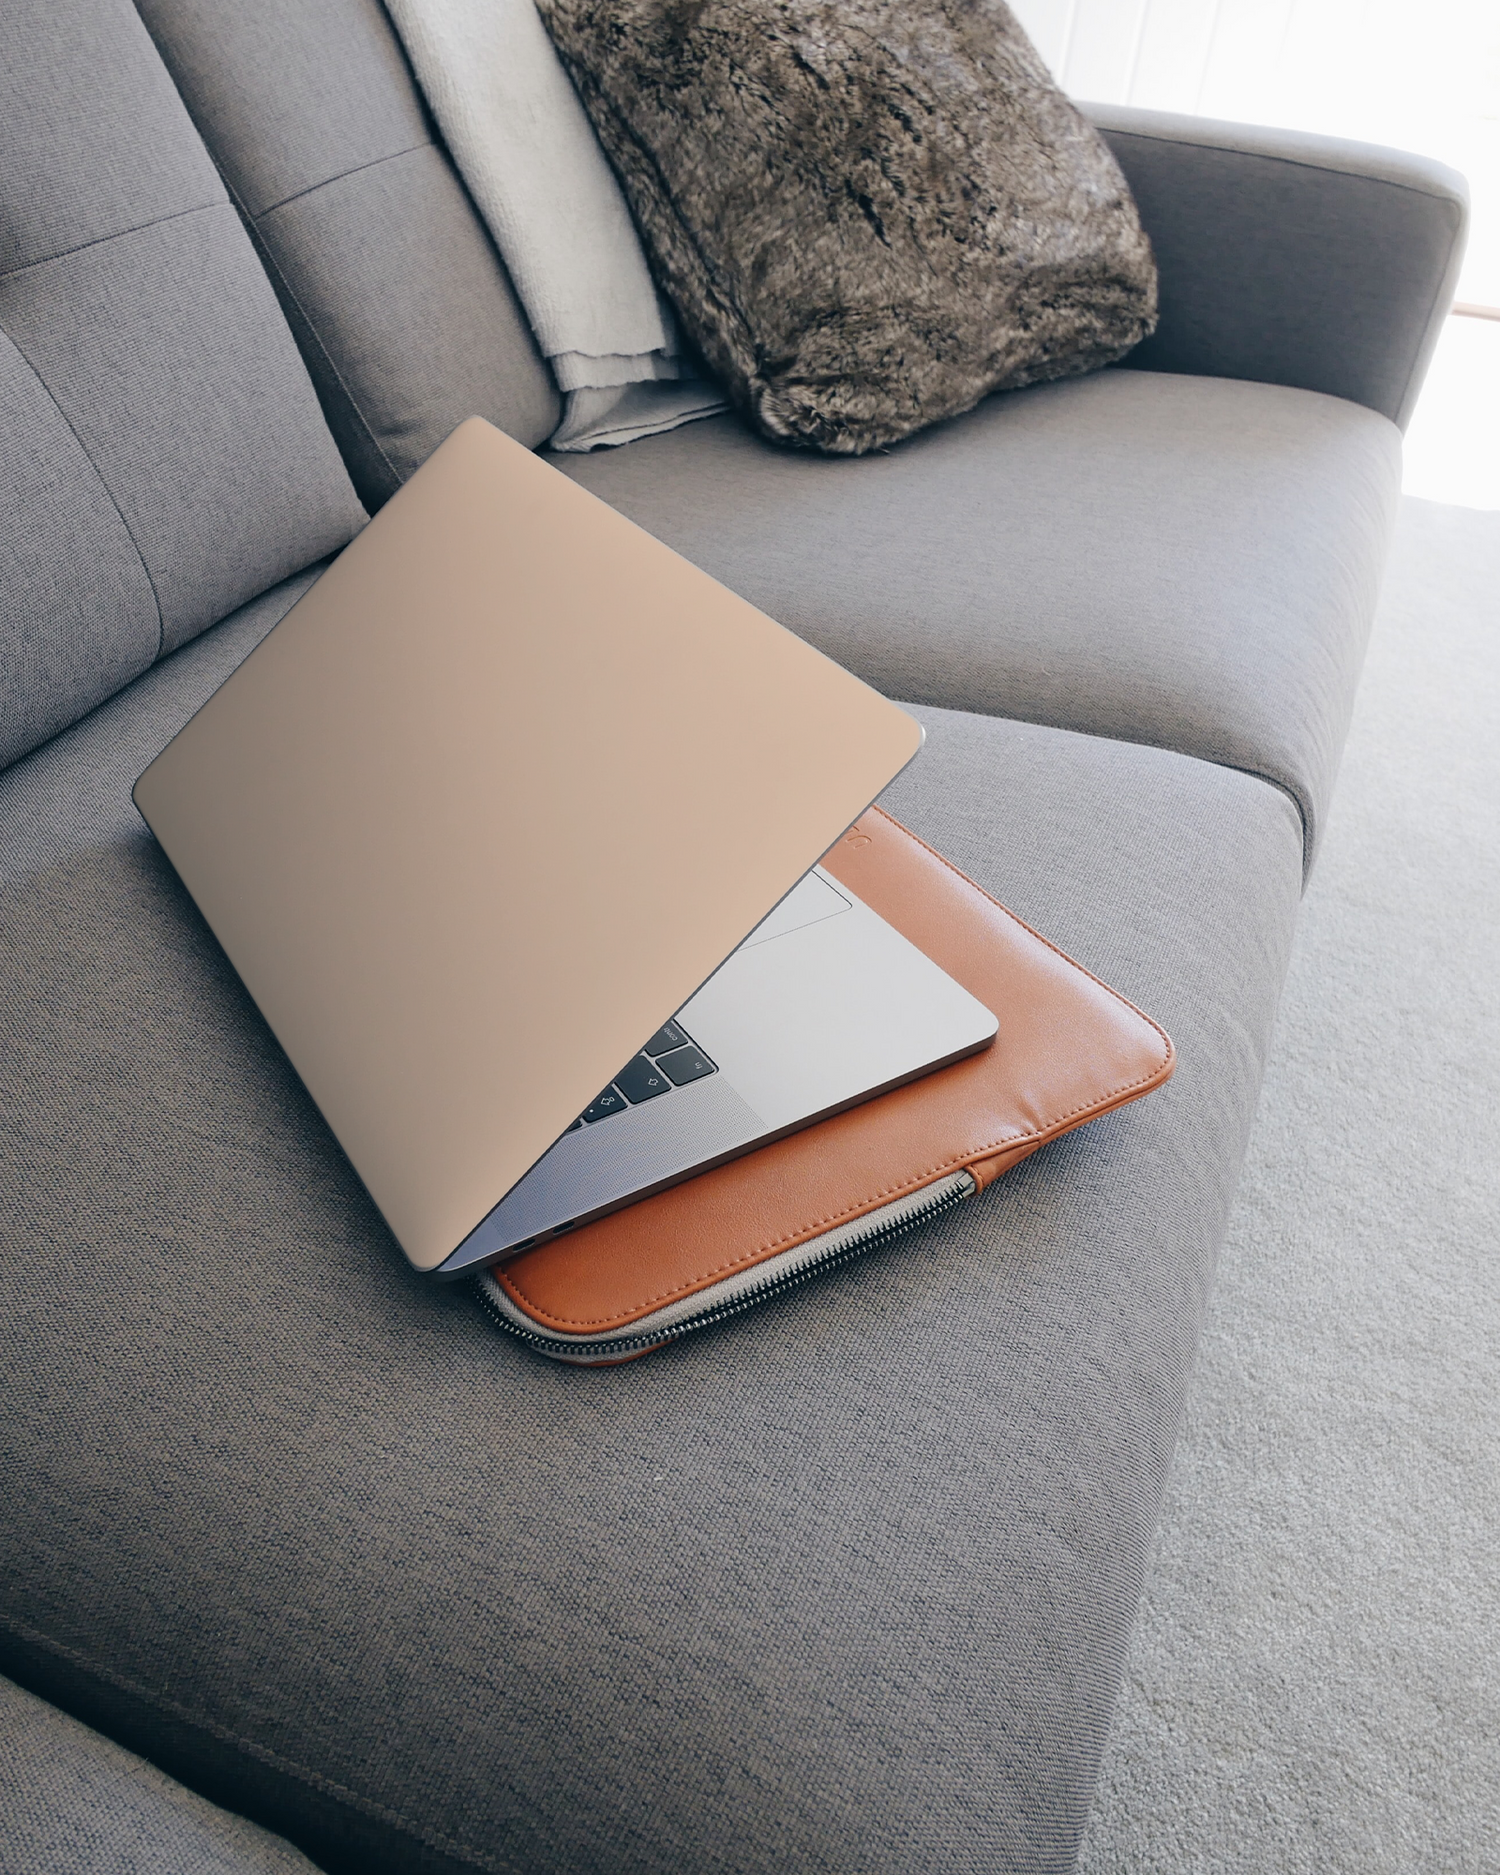 PEACH Laptop Skin for 15 inch Apple MacBooks on a couch